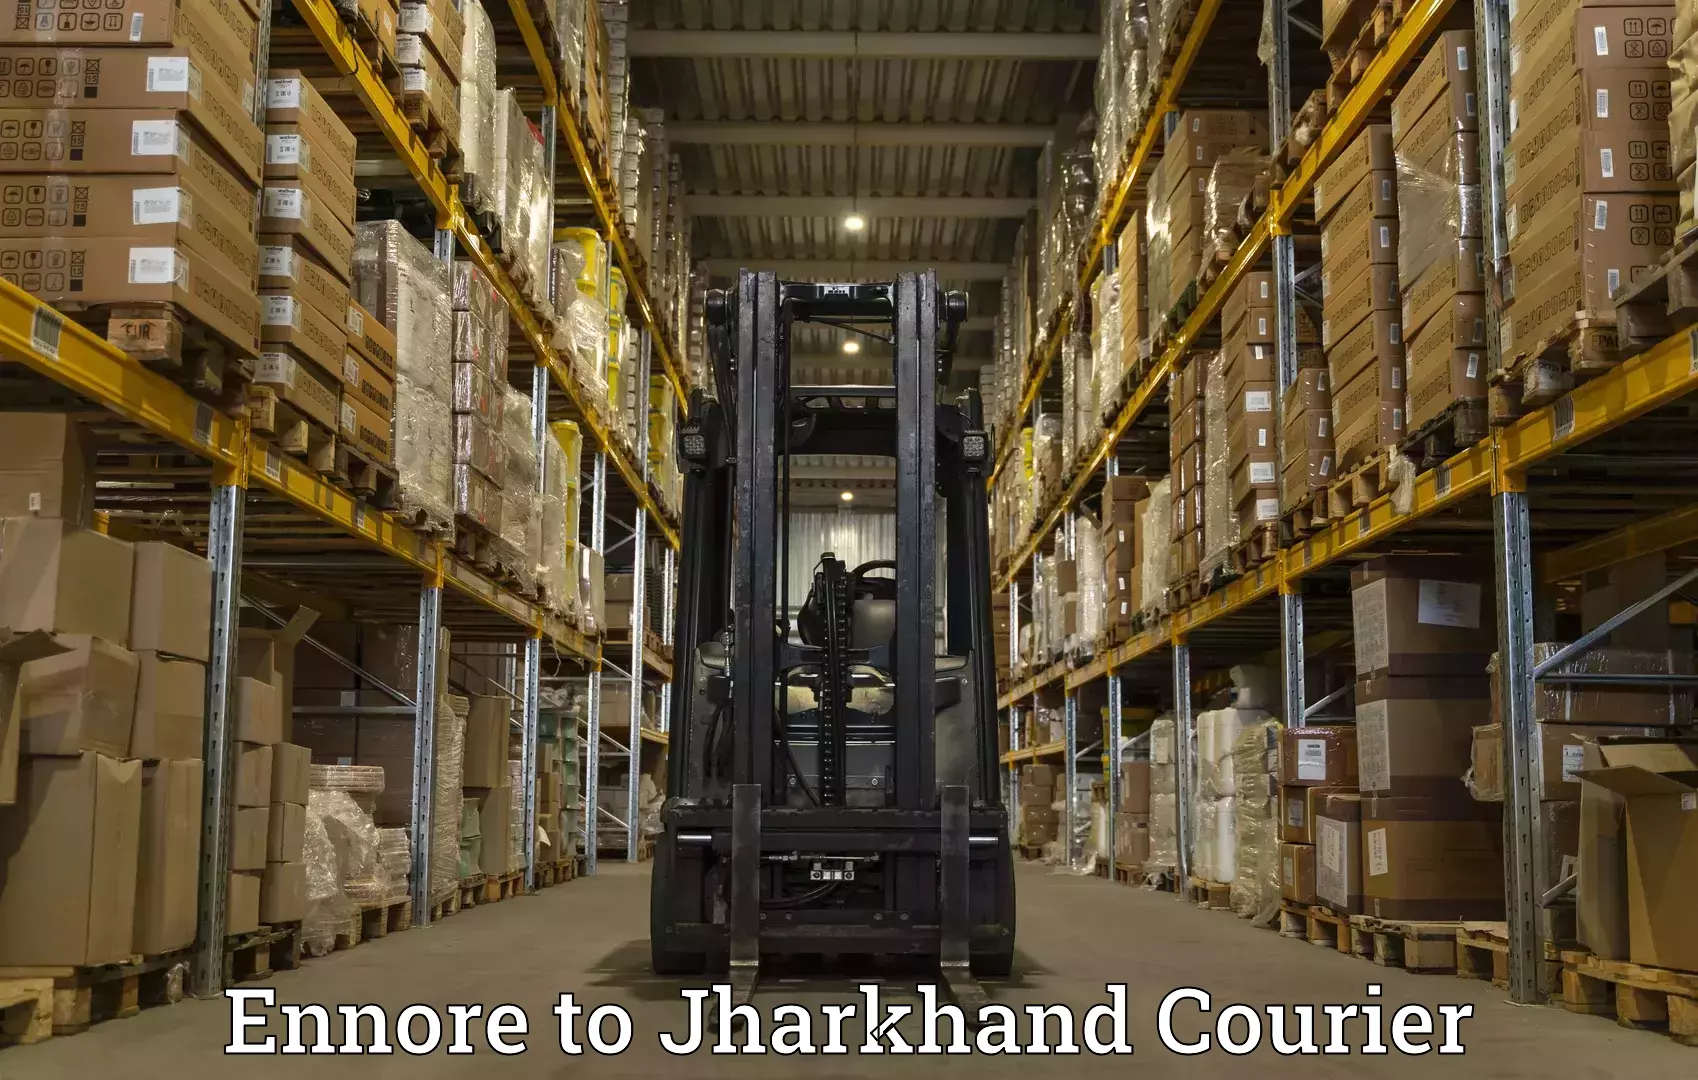 On-call courier service Ennore to Jharkhand